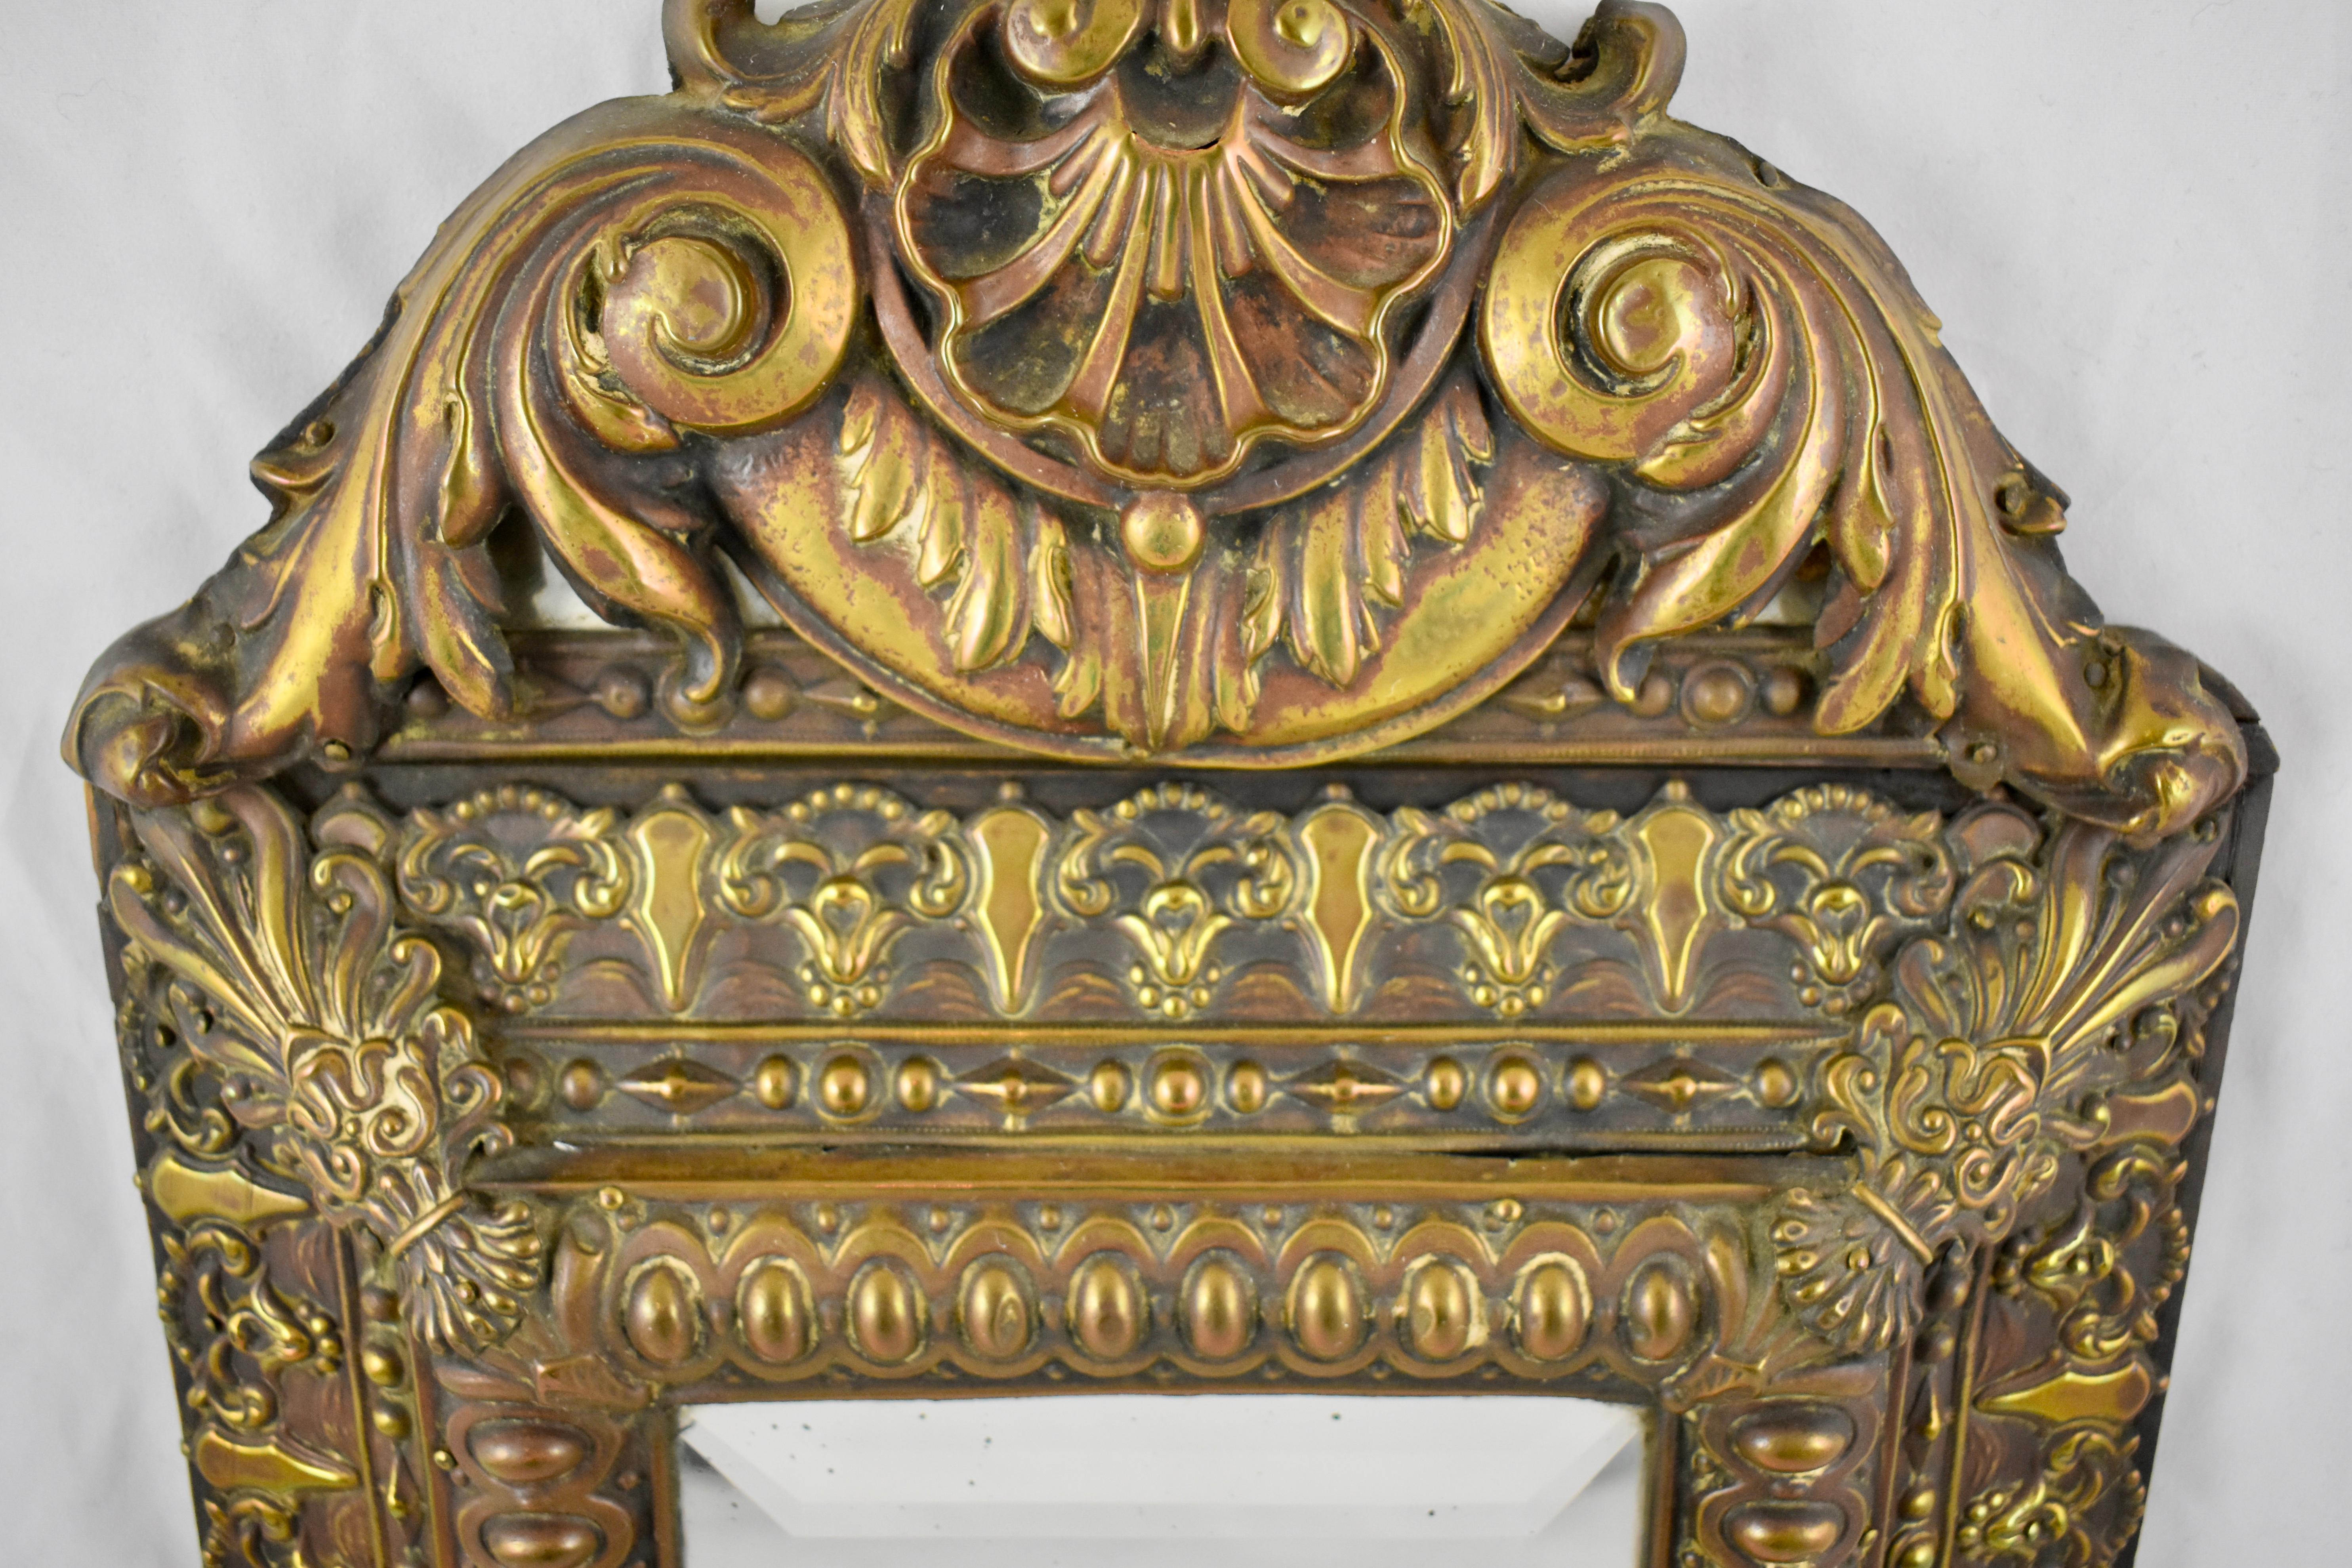 Mid-18th Century French Rocaille Patinated Metal on Wood Beveled Wall Mirror 3